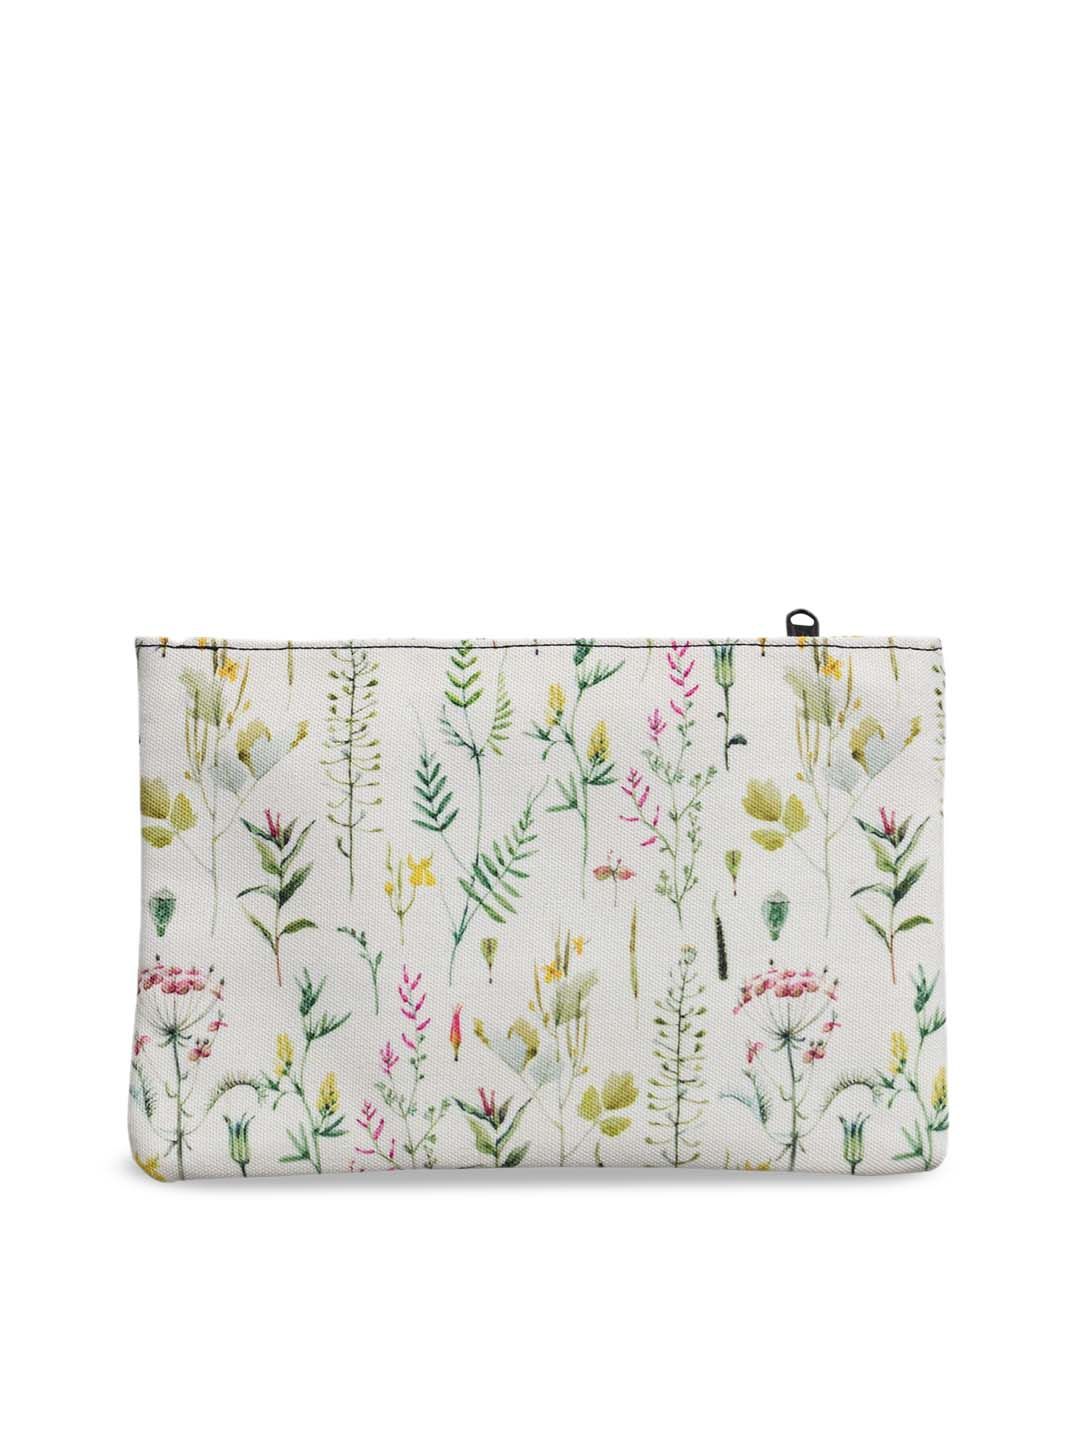 BandBox White Floral Printed PU Structured Tote Bag Price in India